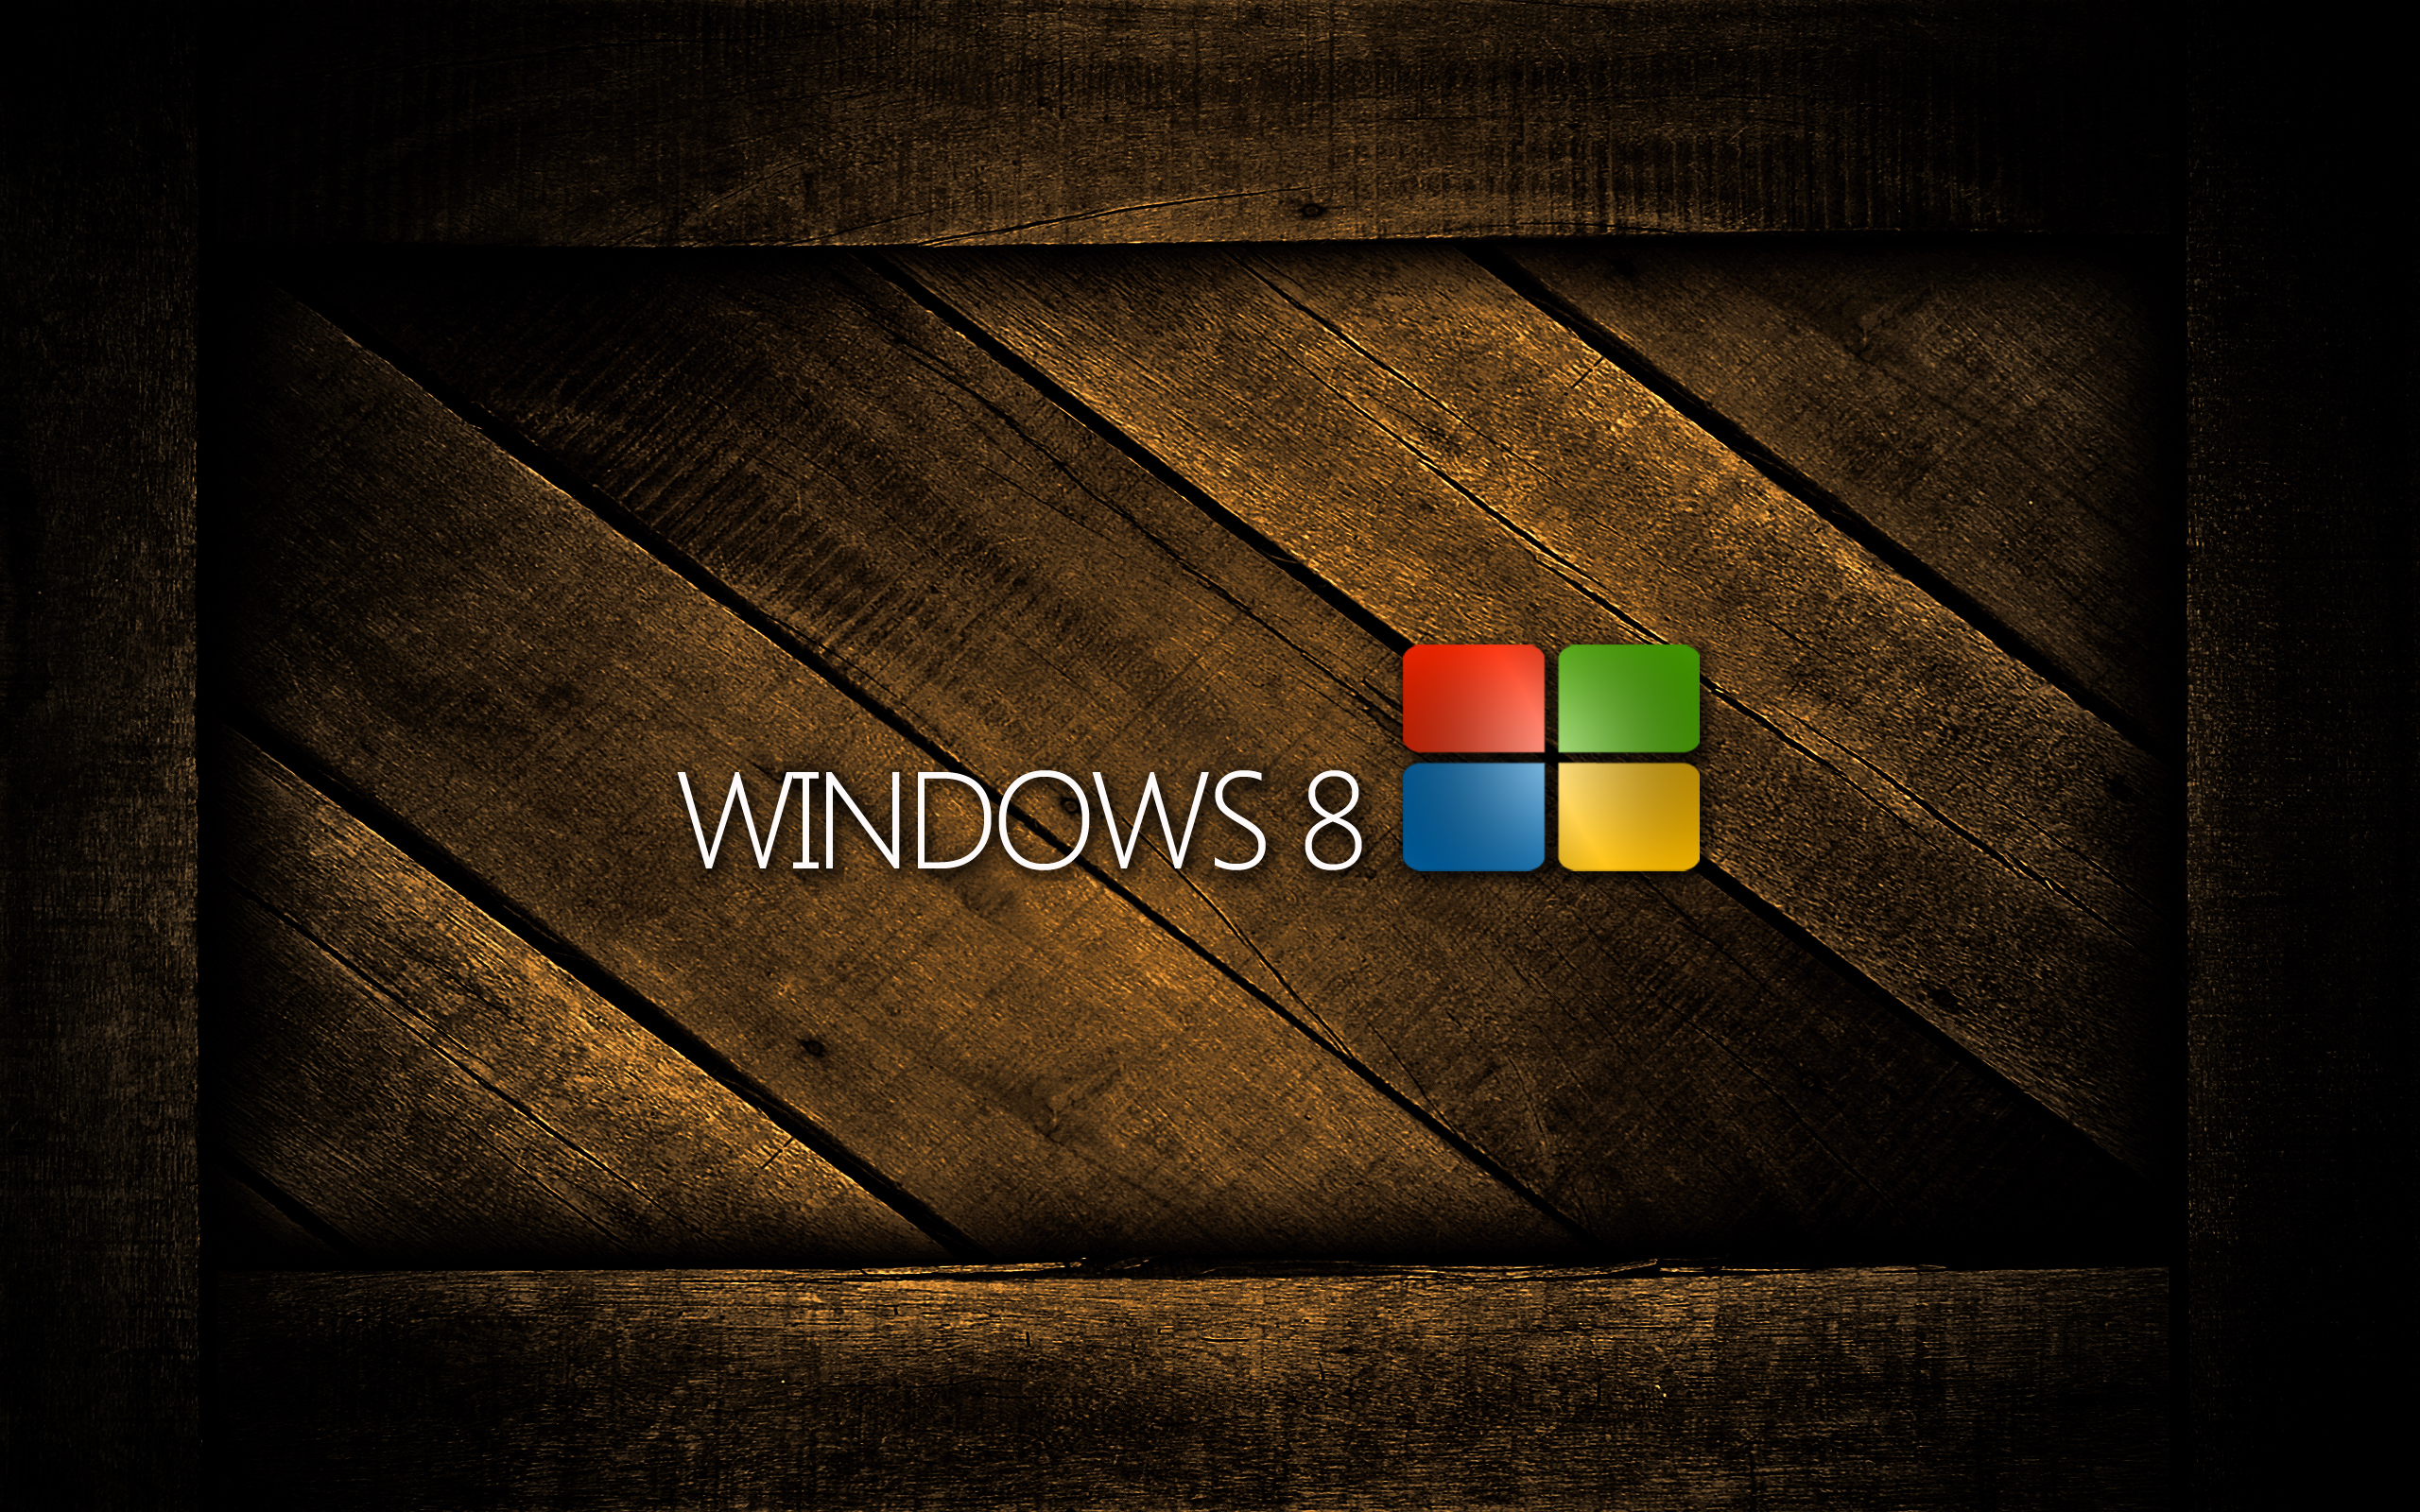 HD Wallpapers for Windows 8 